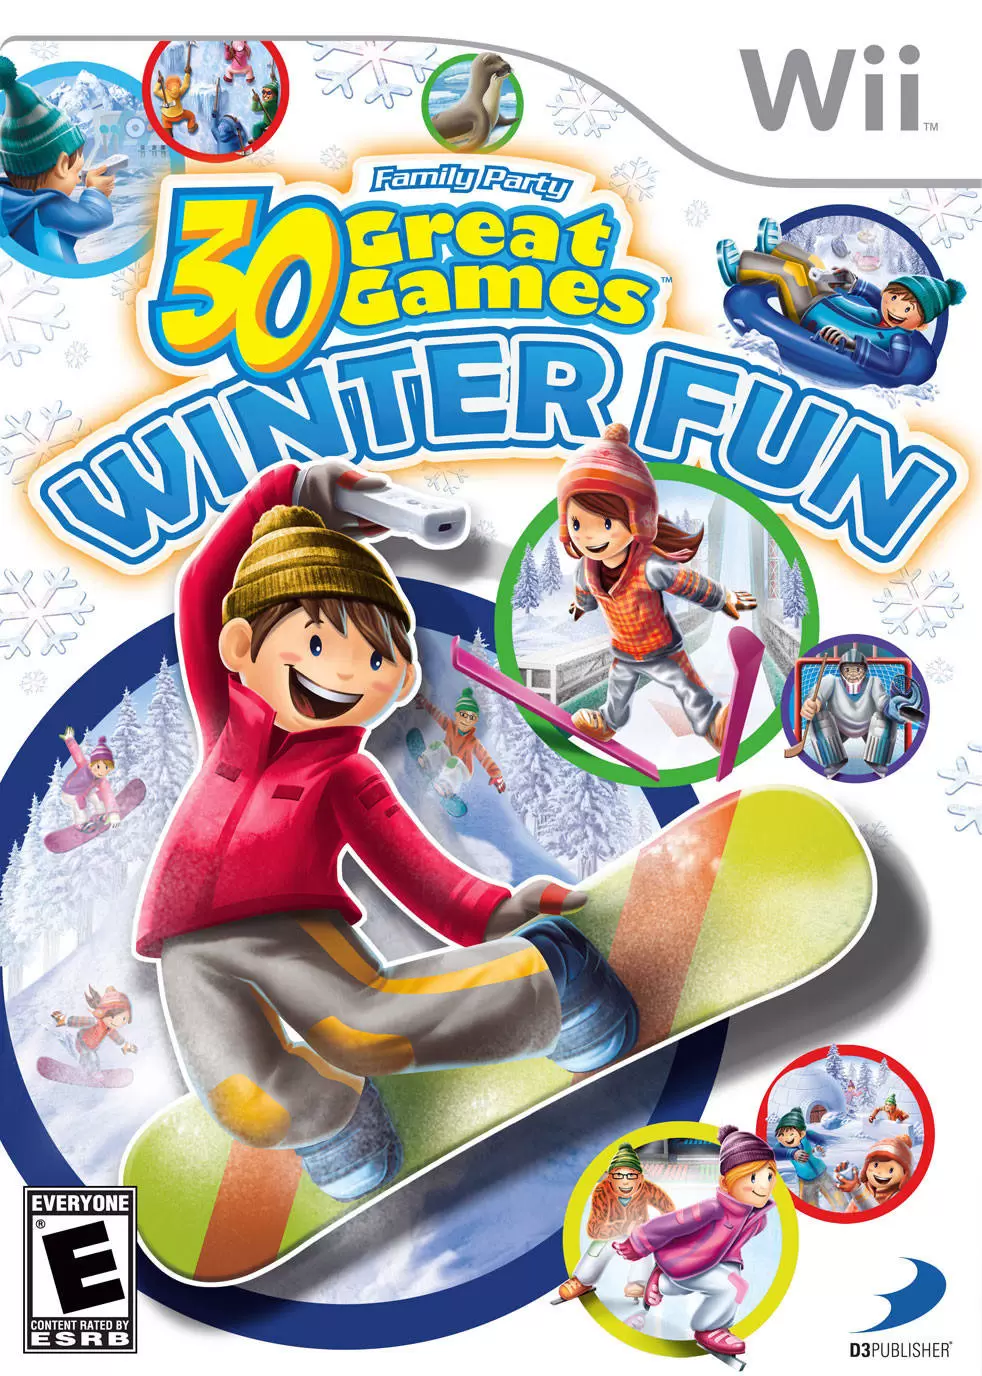 Nintendo Wii Games - Family Party: 30 Great Games - Winter Fun